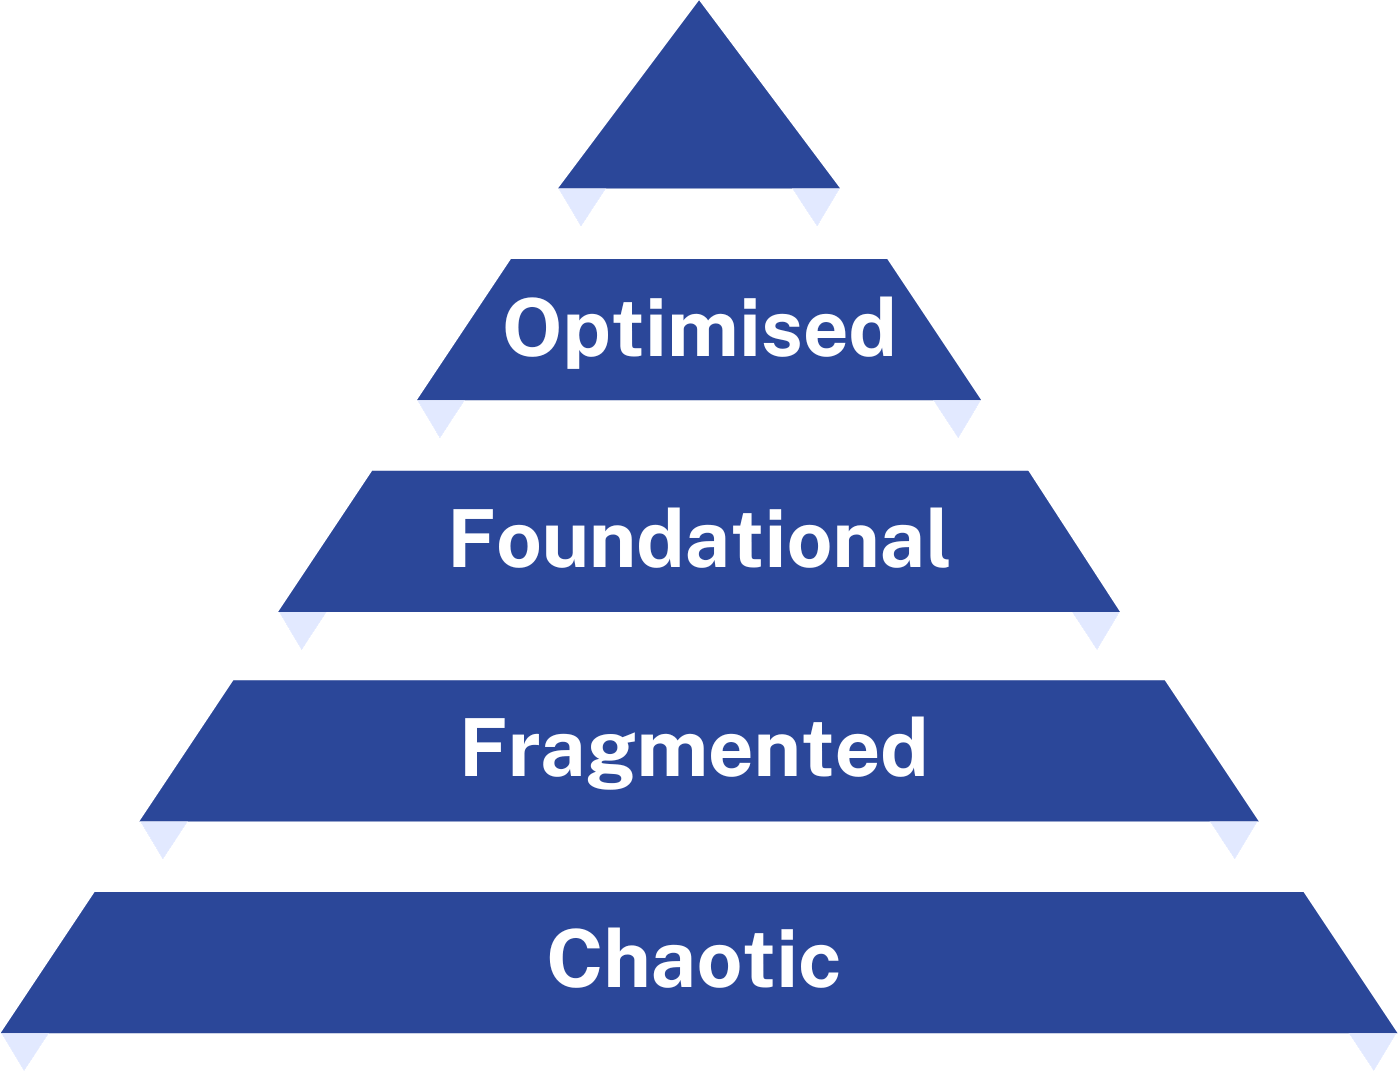 Talent maturity triangle, showing Optimised at the top, then Foundational, then Fragmented, then Chaotic at the bottom